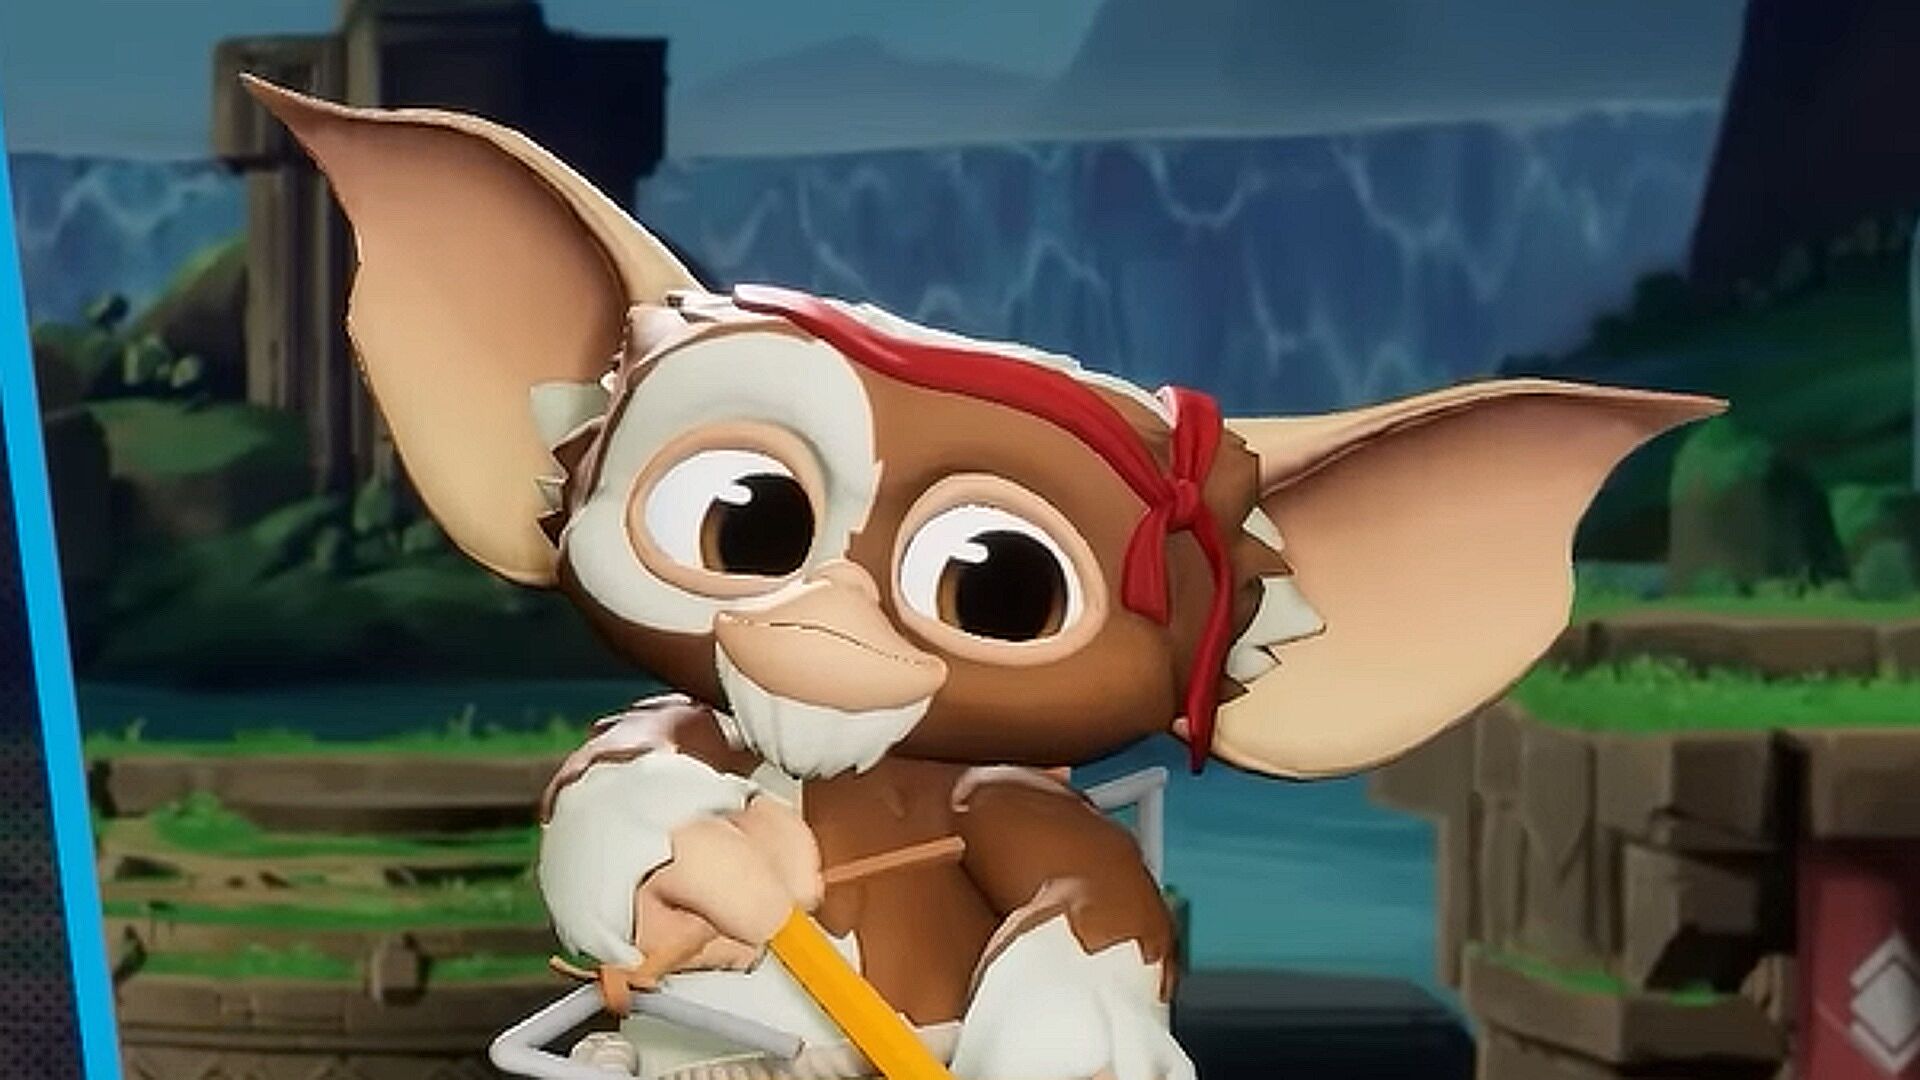 Gremlins cutie Gizmo arrives in MultiVersus, and he’s just in time for the latest update